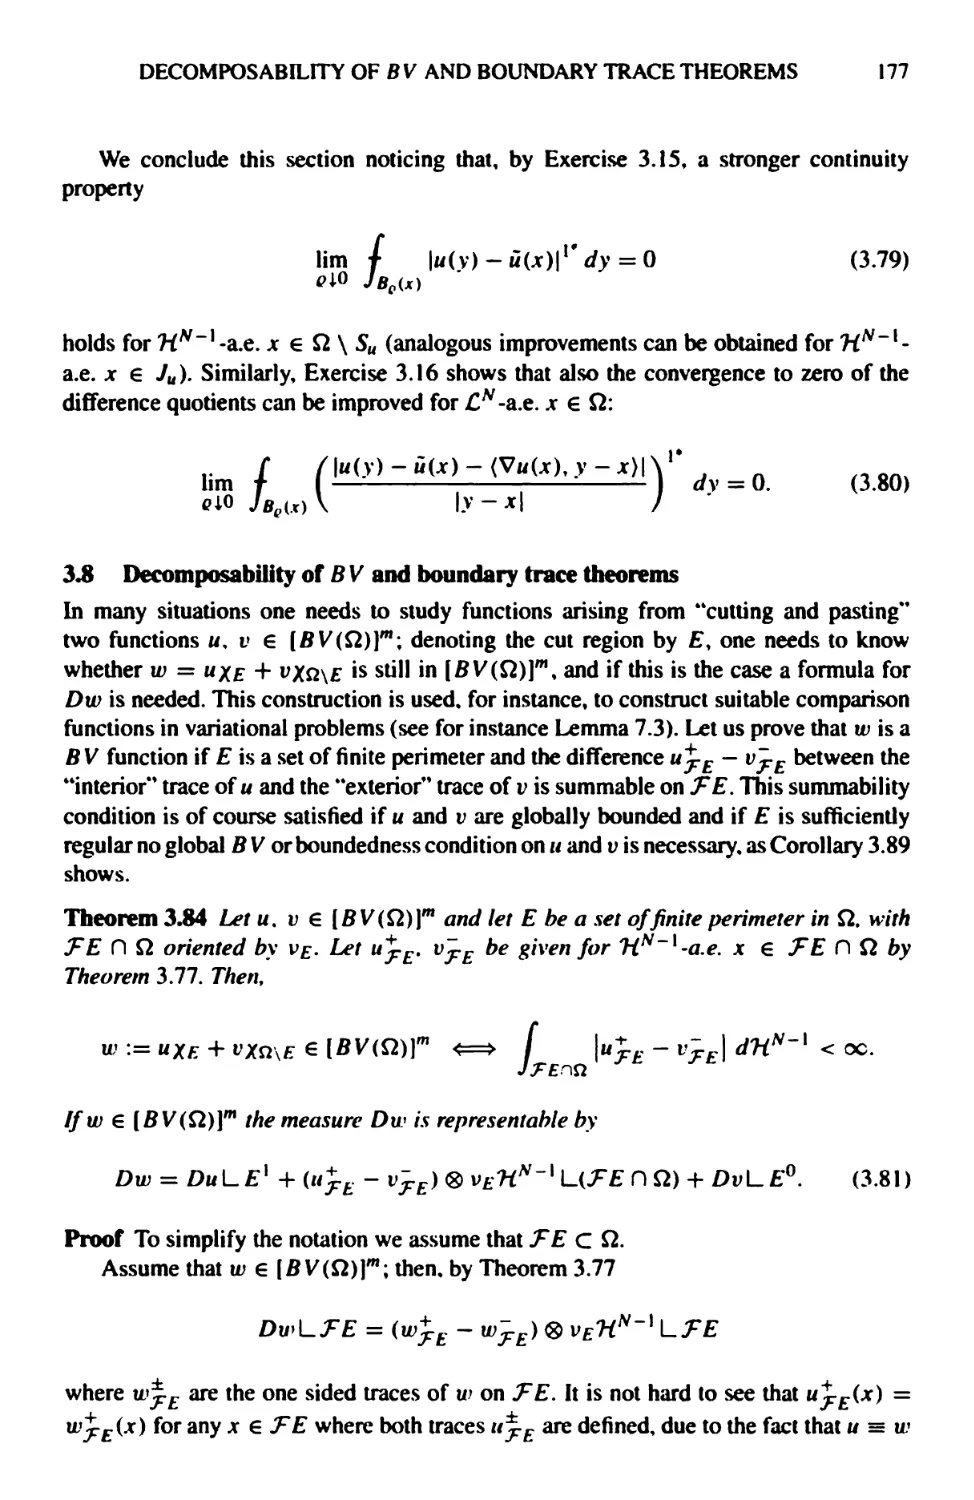 3.8 Decomposability of BV and boundary trace theorems